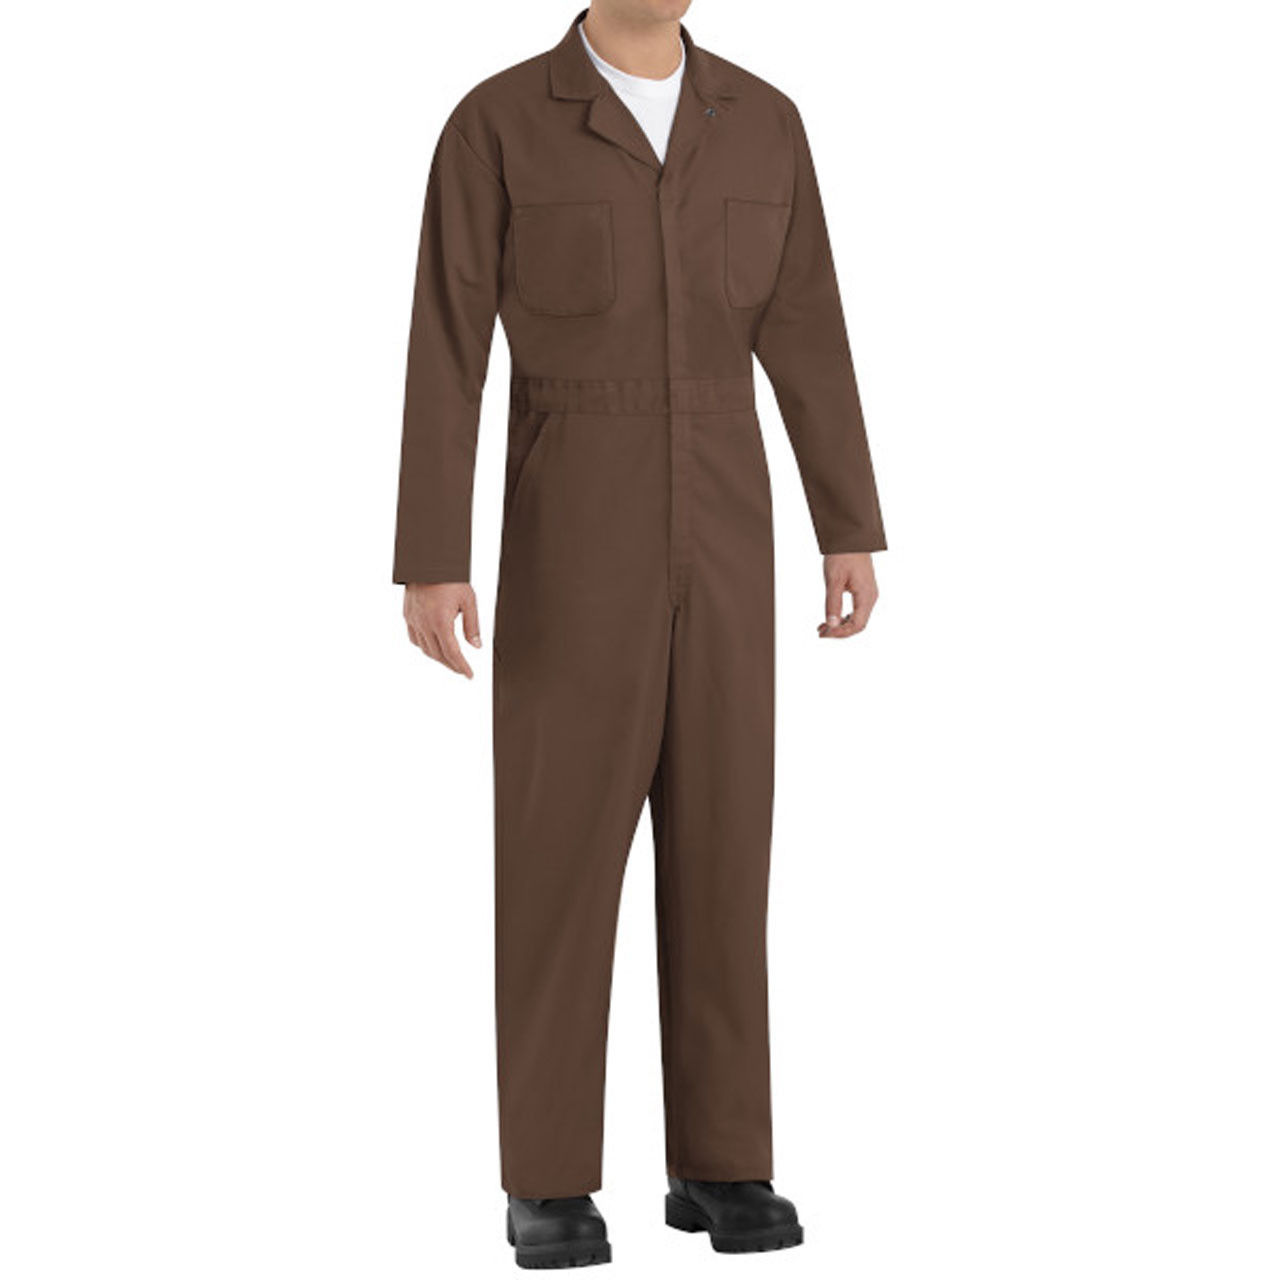 Does the brown coveralls have a twill action back collar?